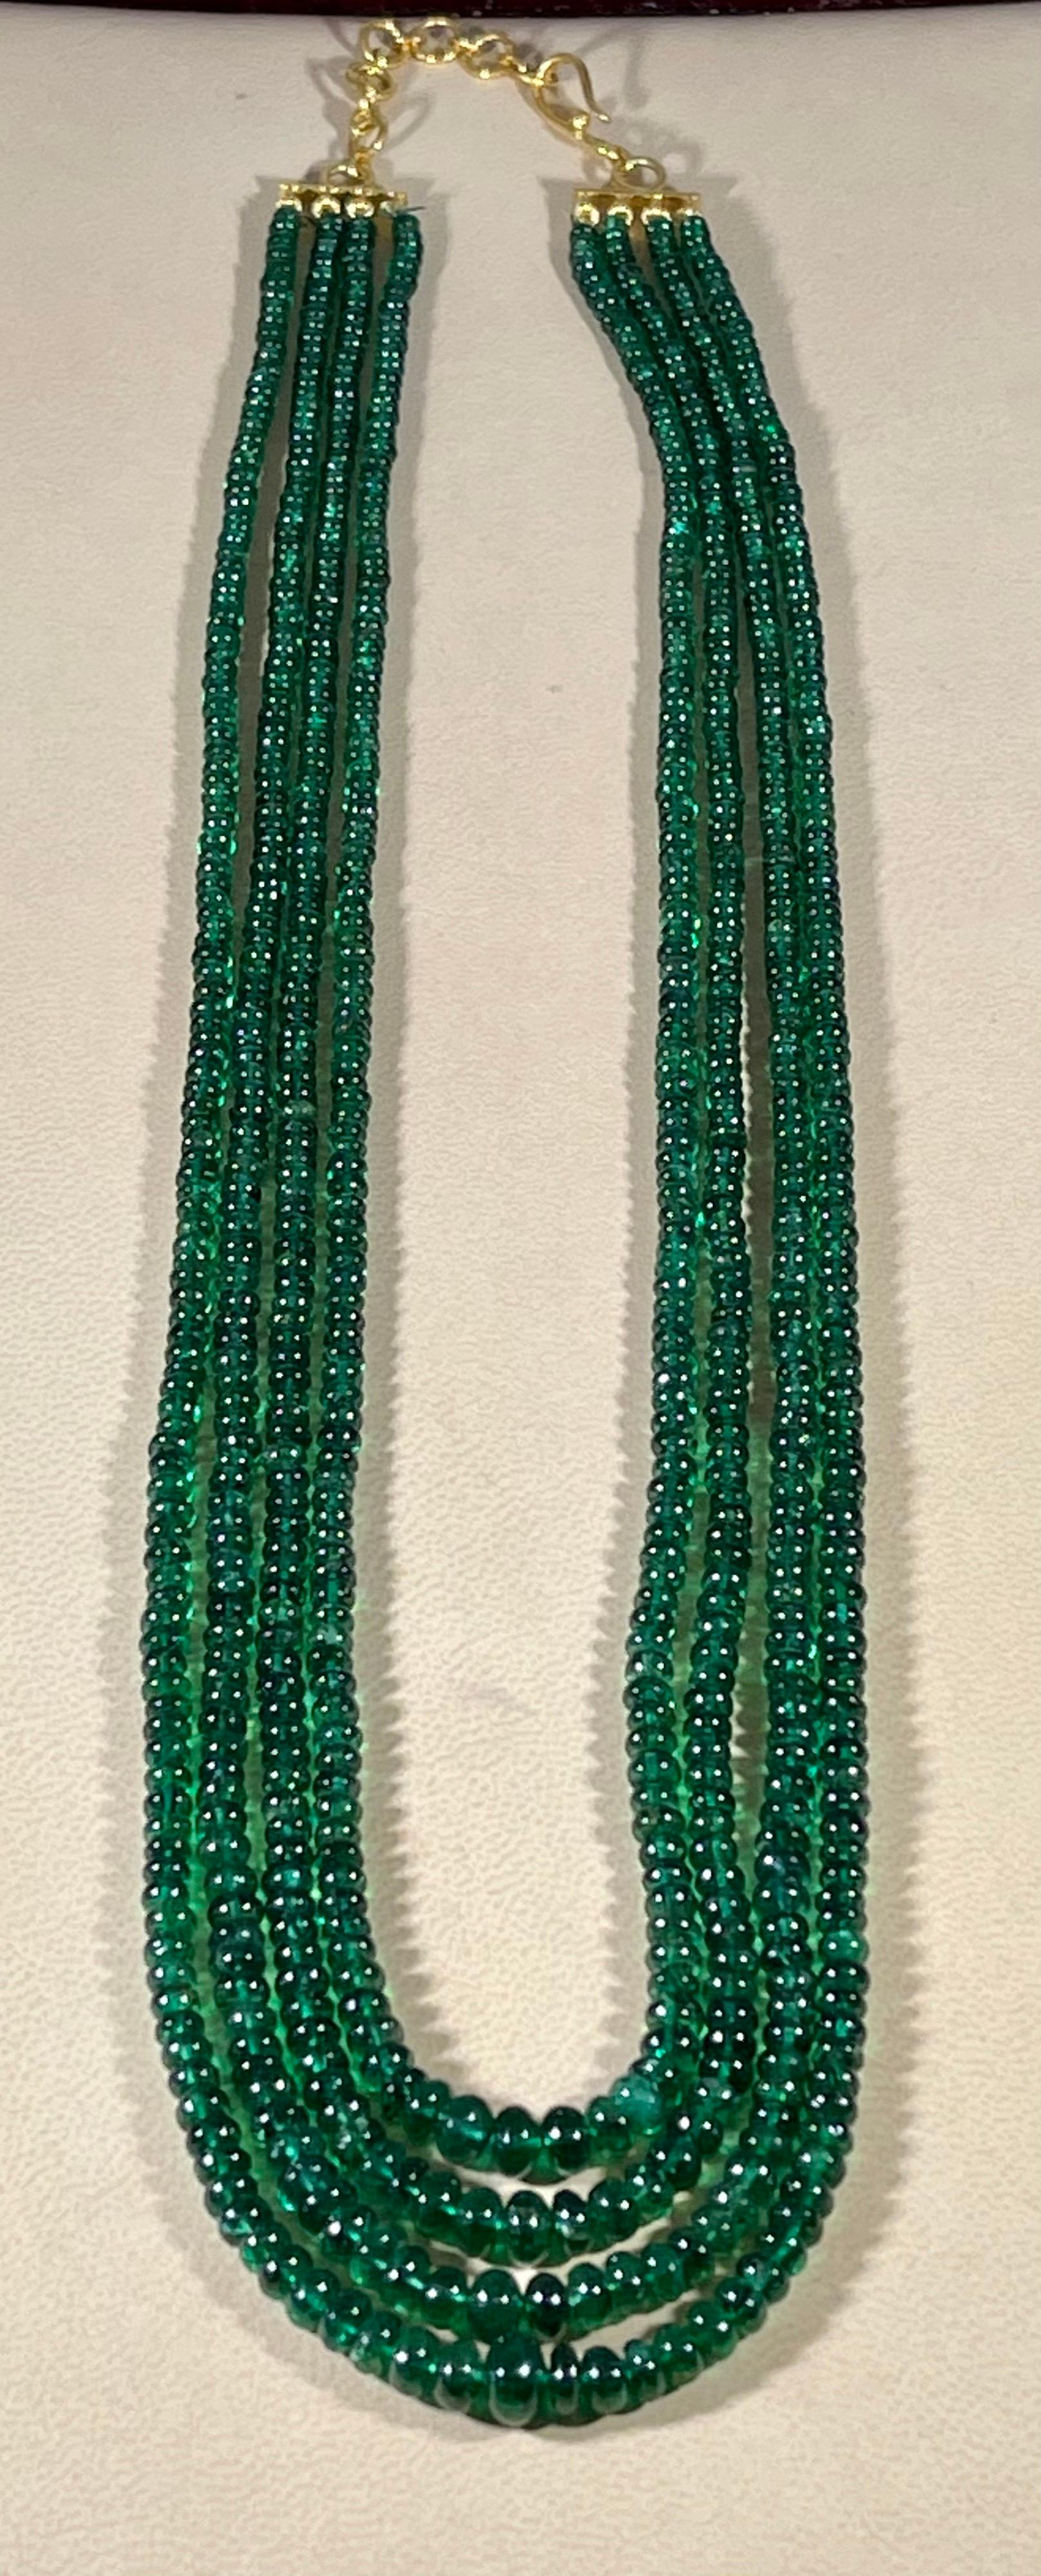 Women's 250ct Fine Emerald Beads 4 Line Necklace with 14 Kt Yellow Gold Clasp Adjustable For Sale